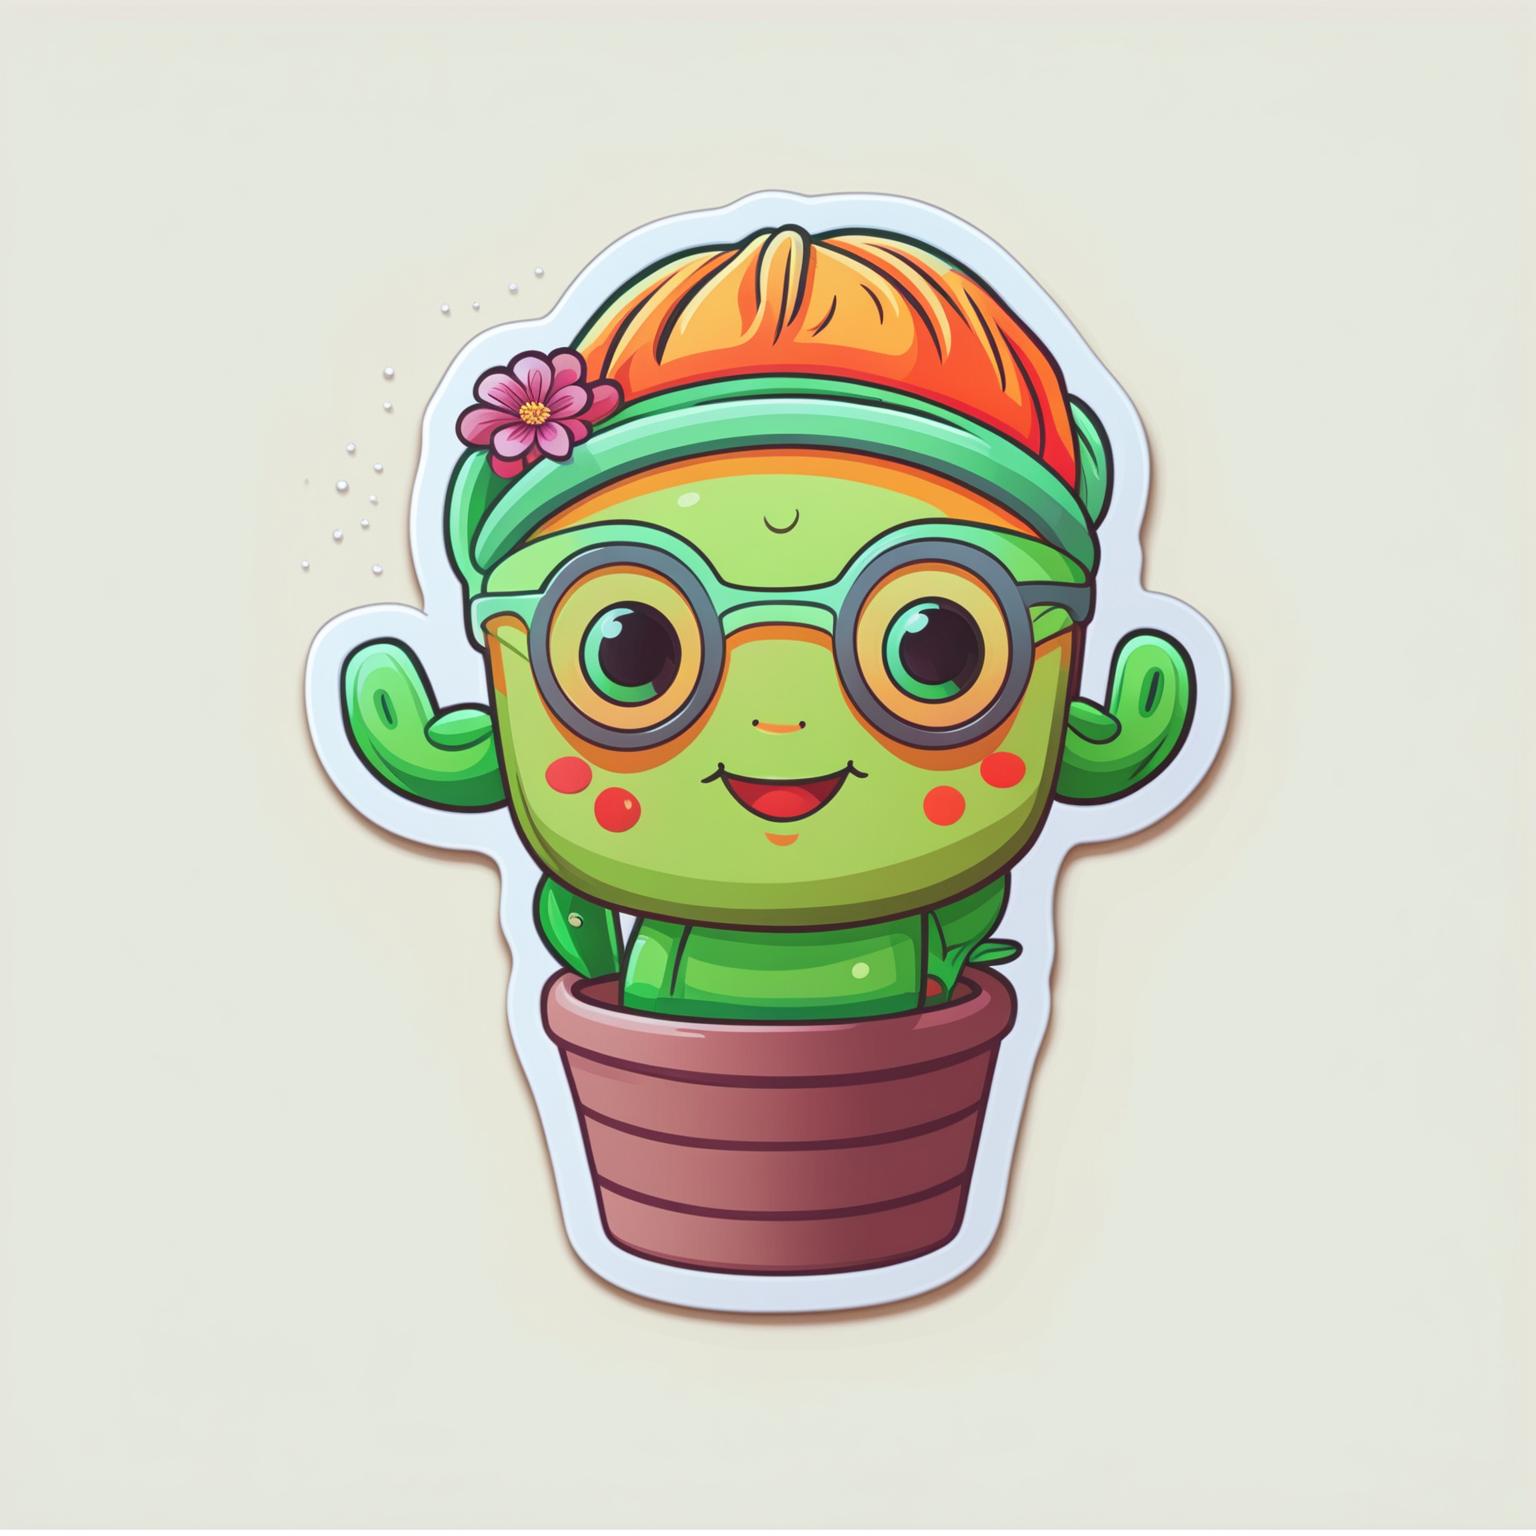 Create a cute cactus sticker design with a cheerful expression, possibly with accessories like flowers or a hat